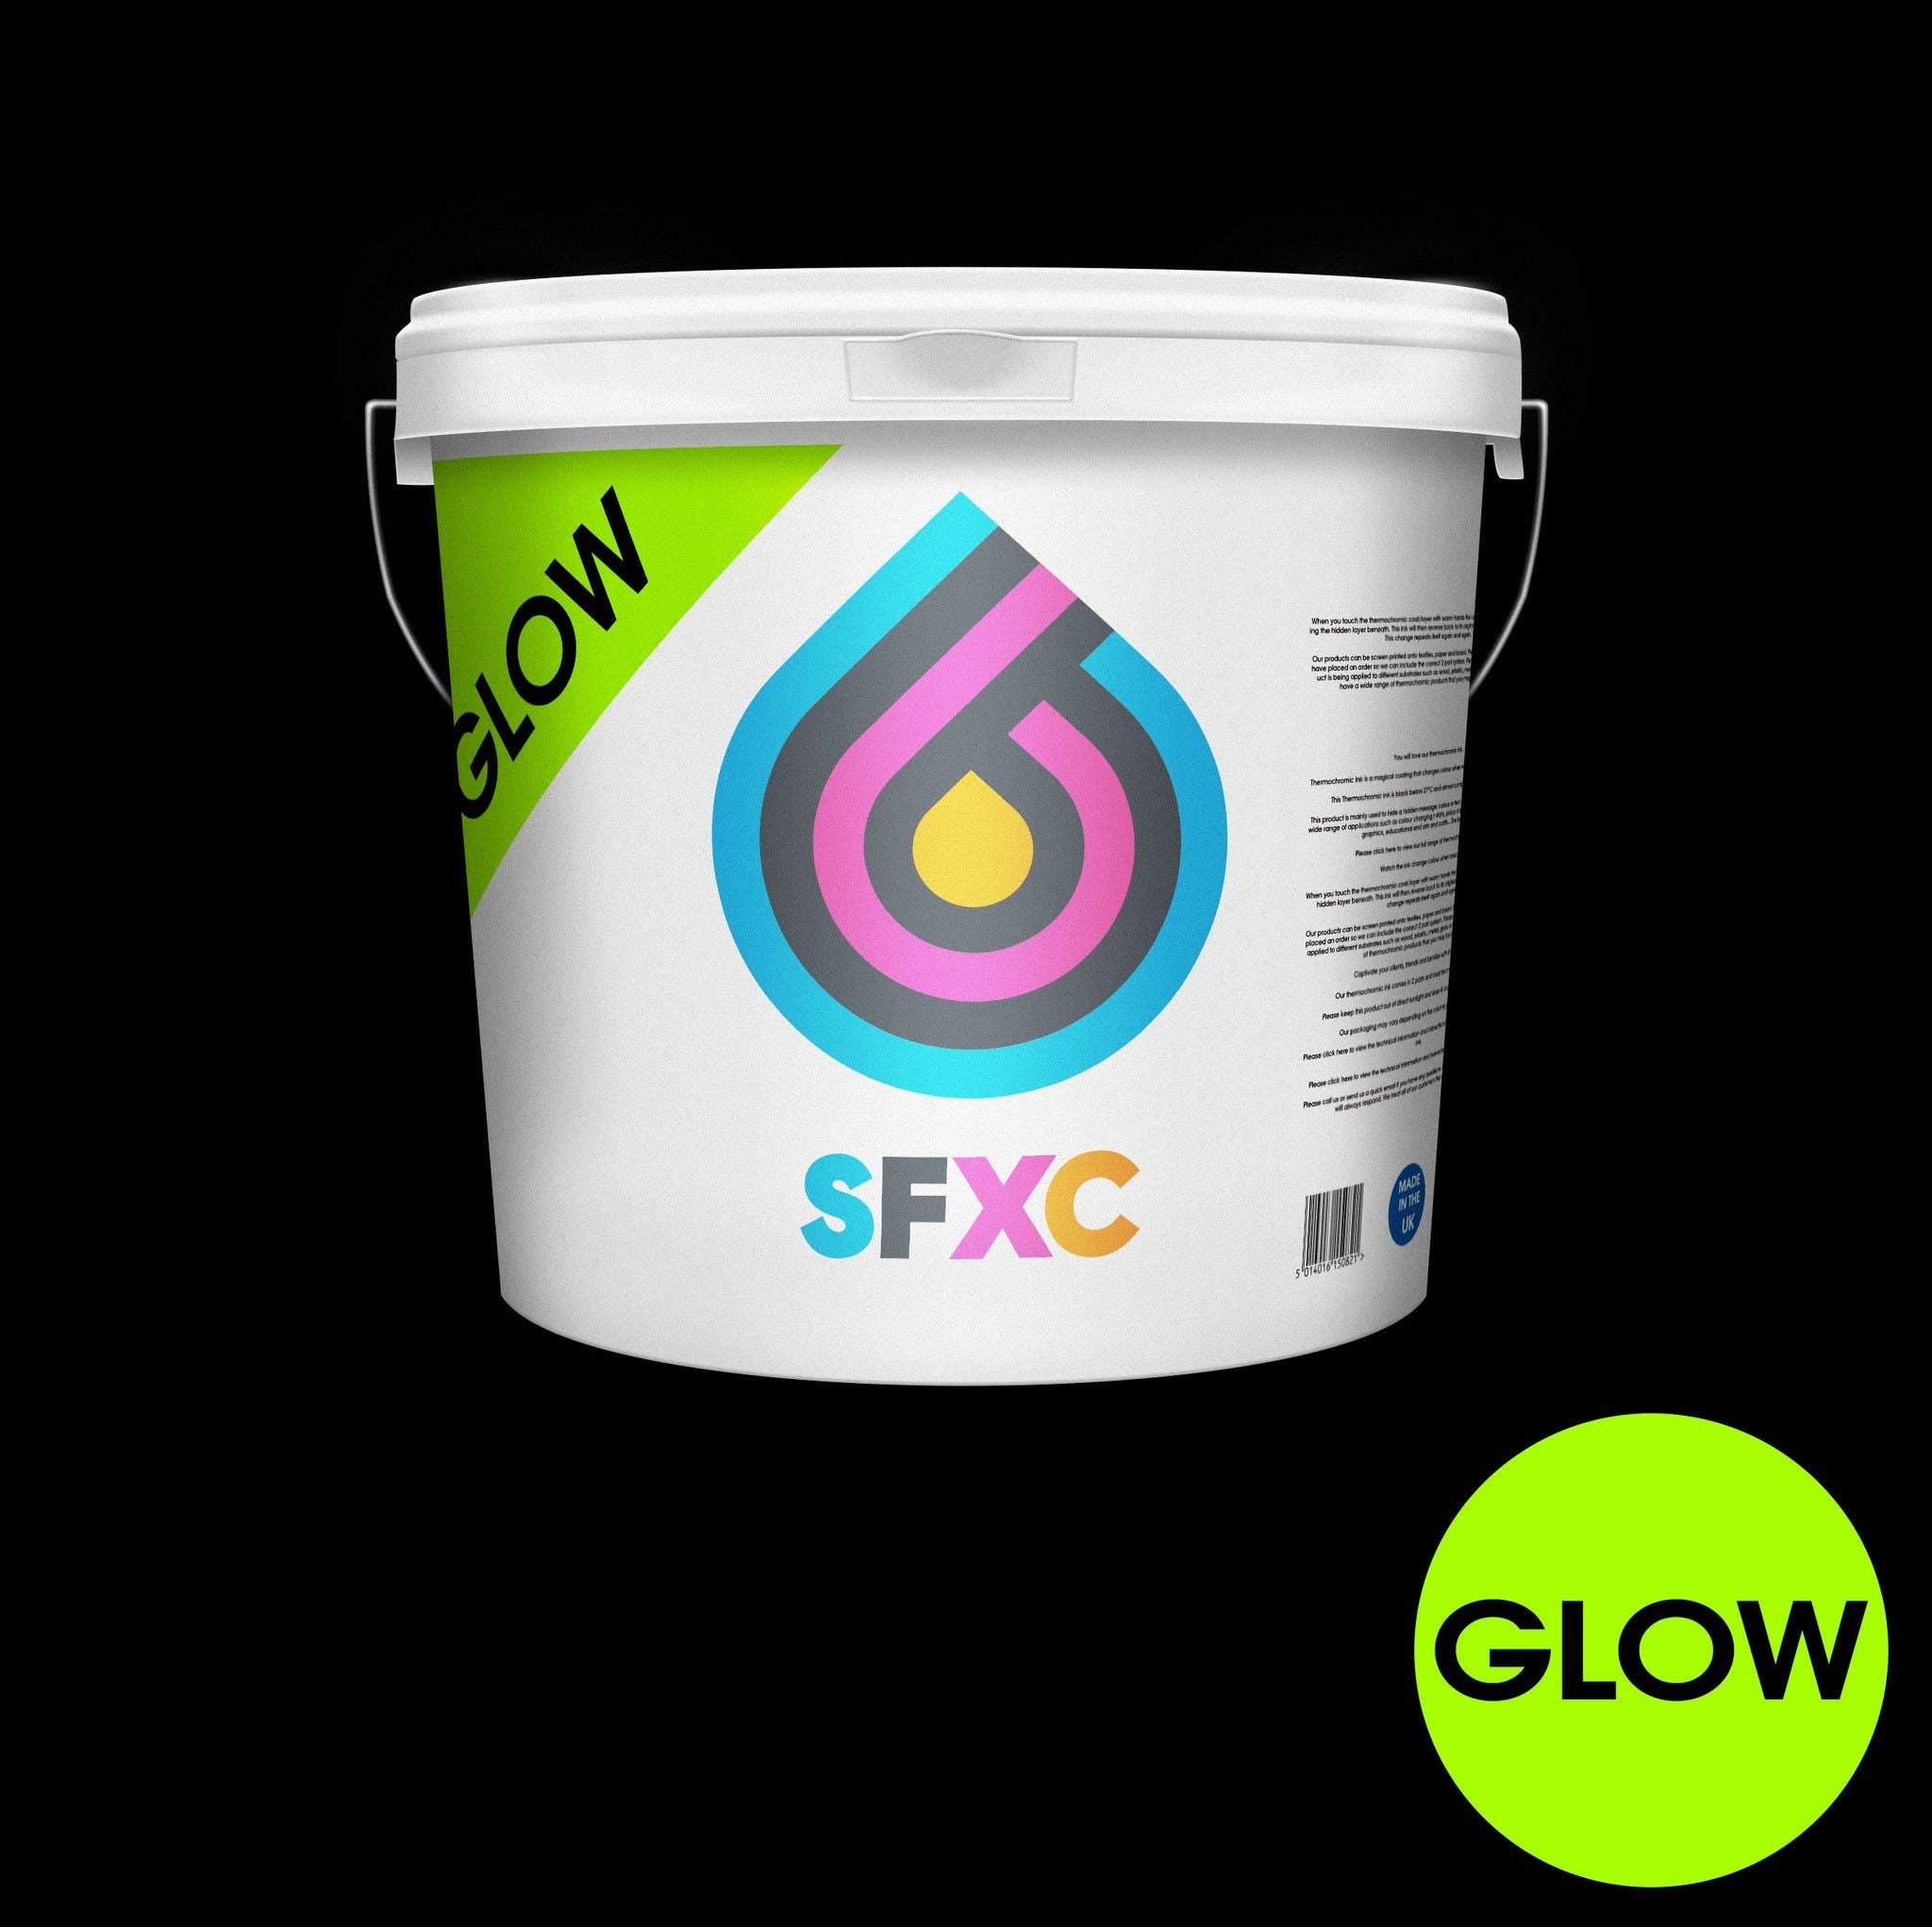 Glow In The Dark Paint - Craft Paint - The Home Depot